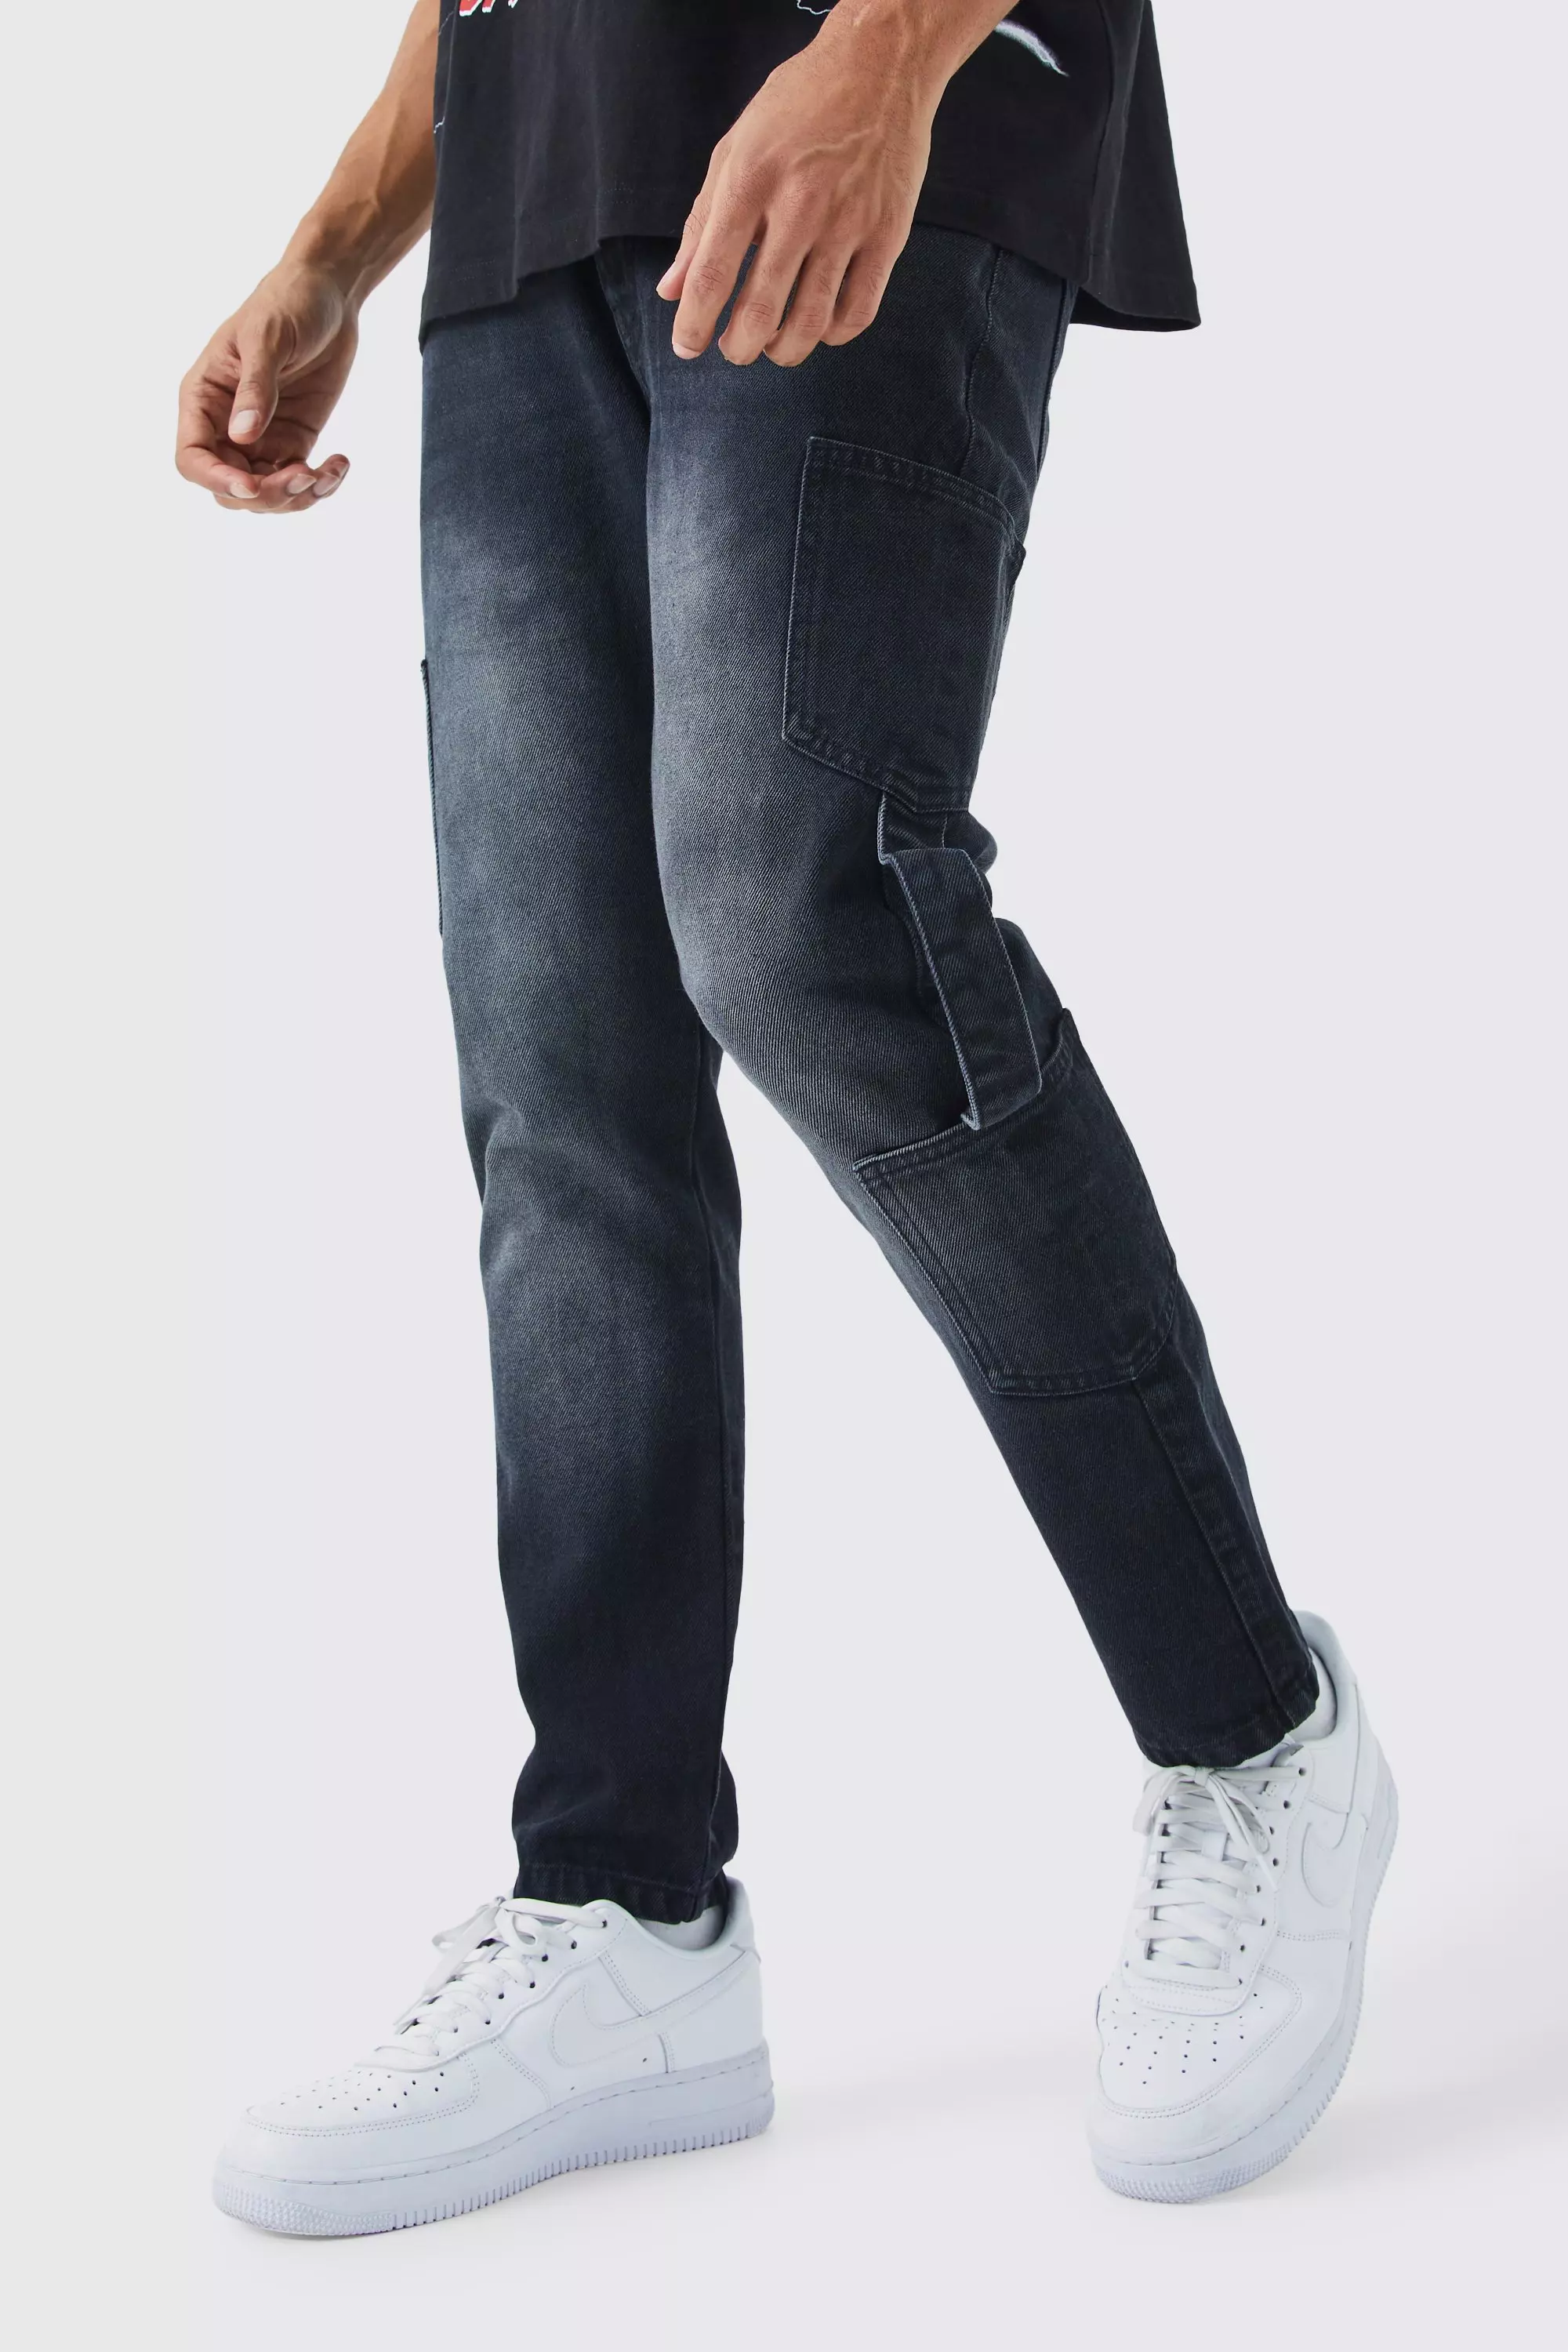 Ash Grey Tapered Rigid Ripped Cargo Strap Jean